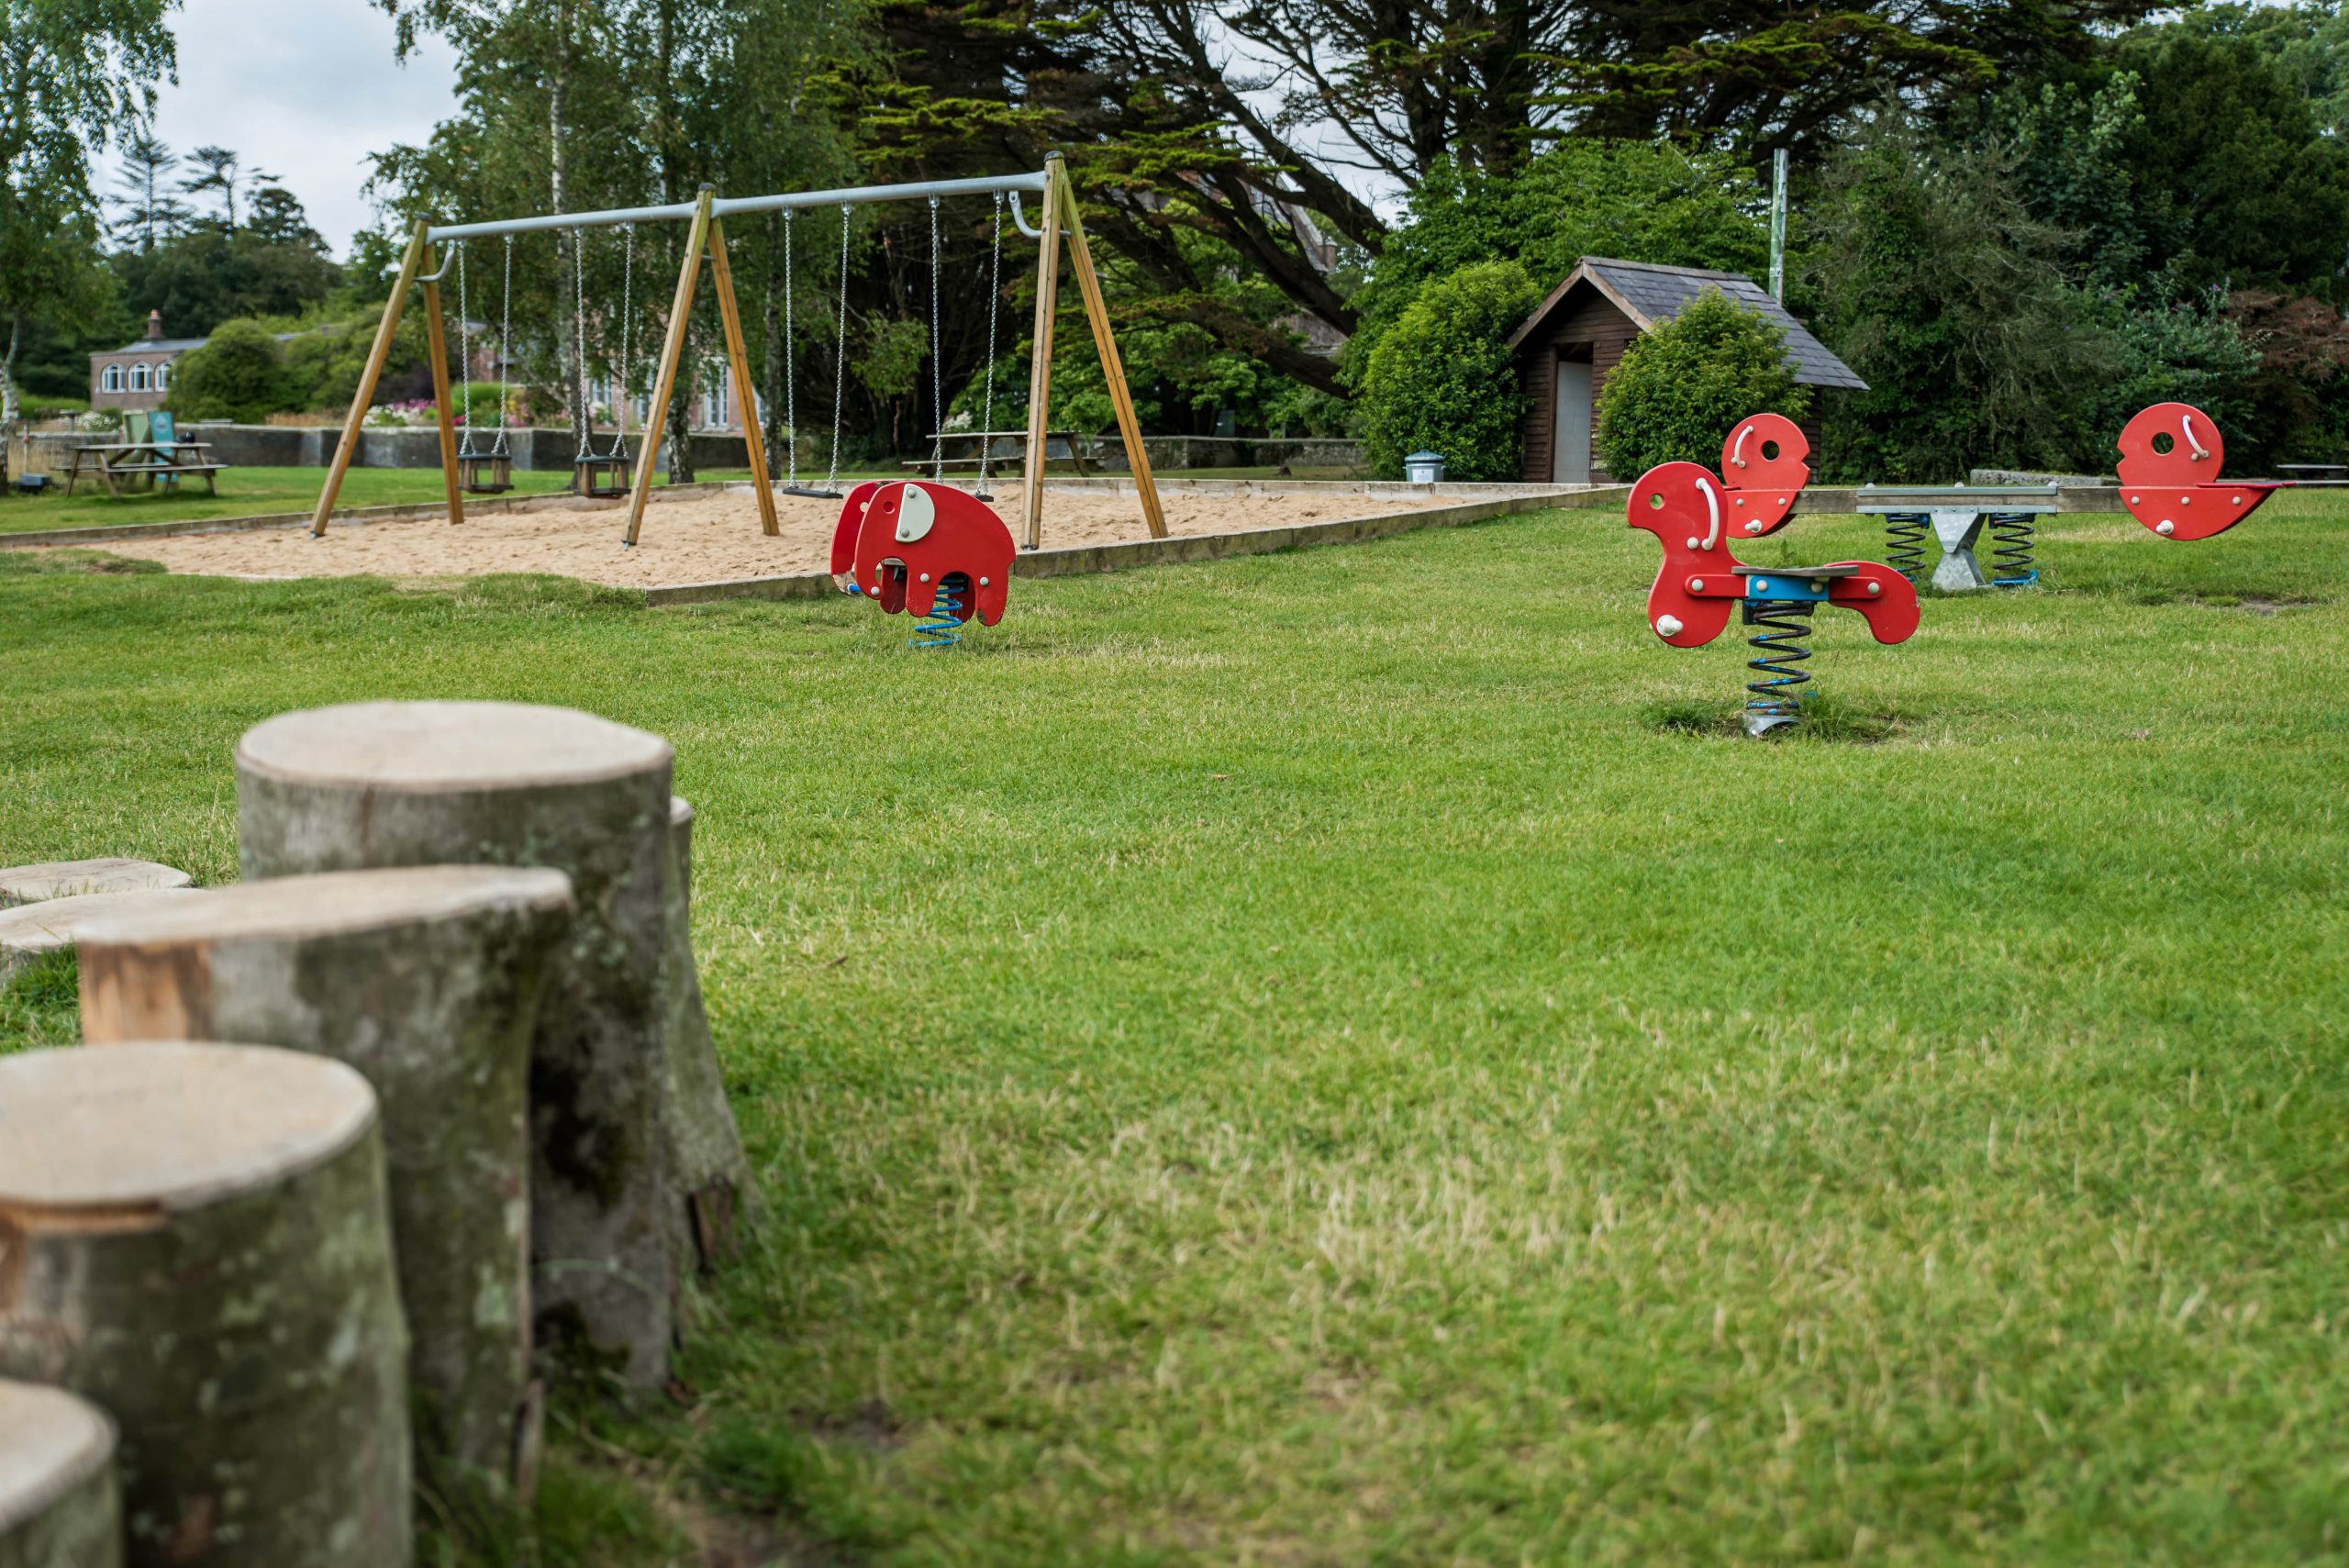 Park with stumps, swings and spring rides